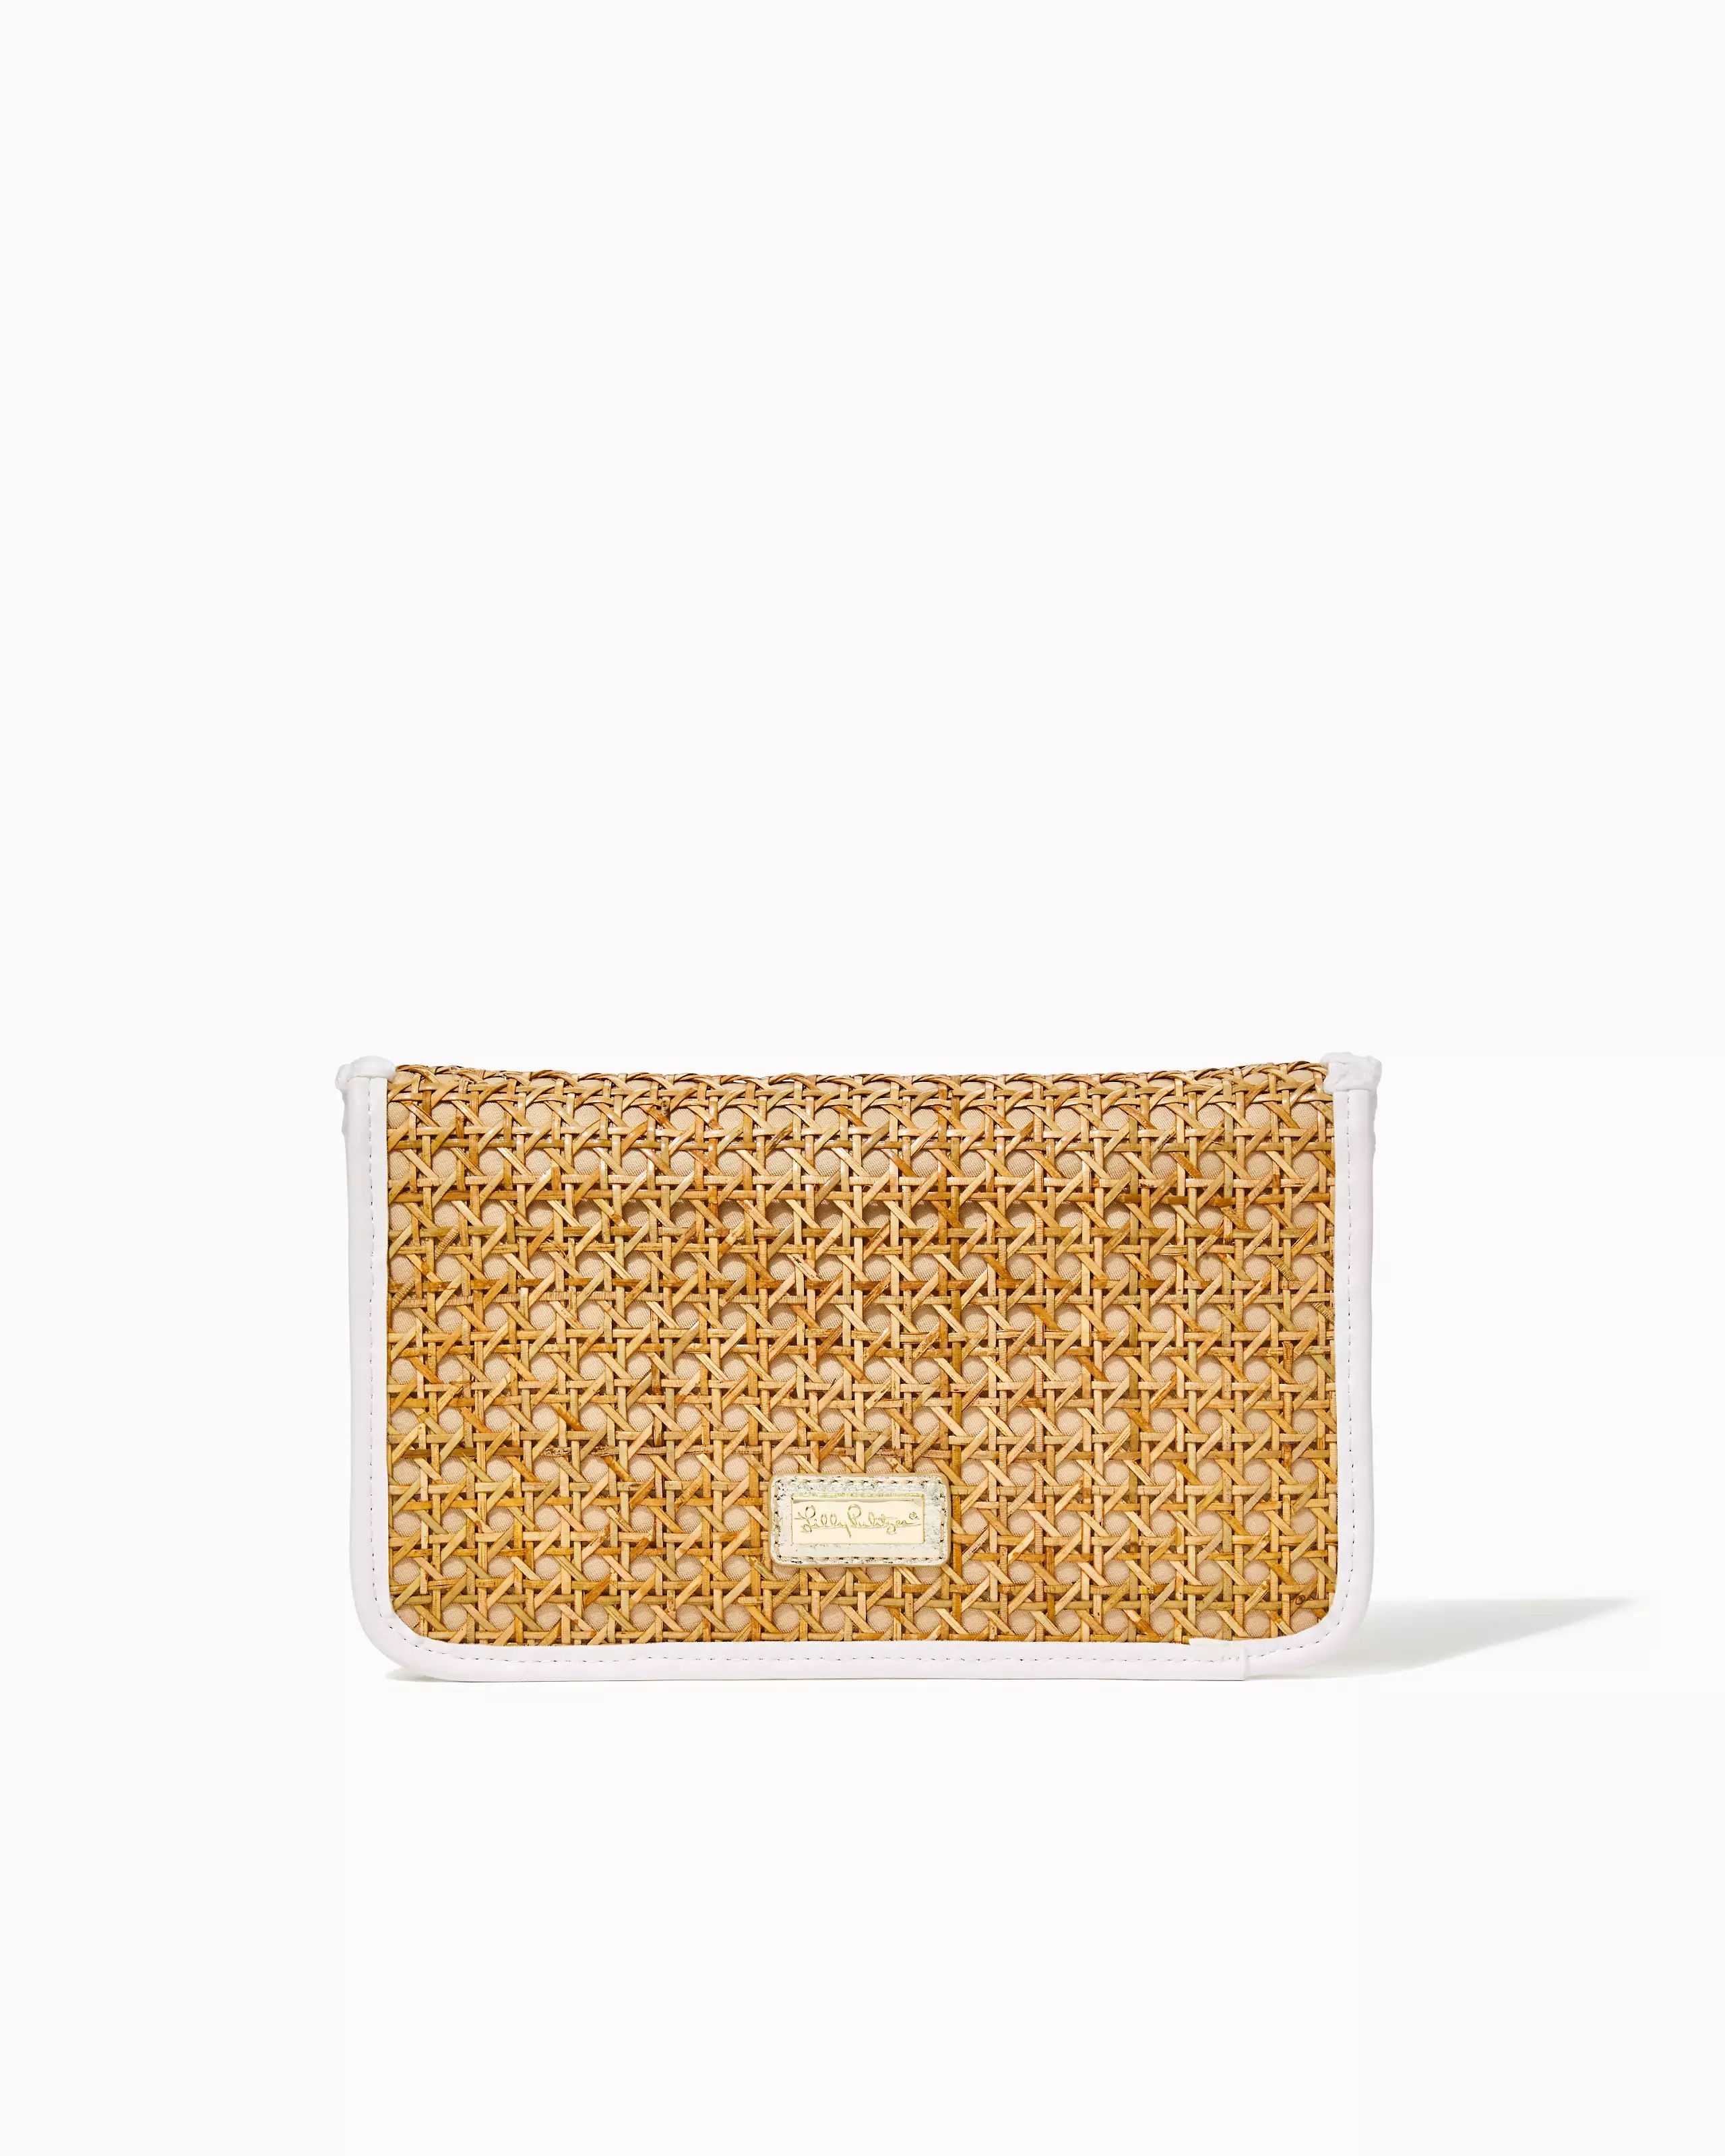 St. Barts Cane Clutch | Lilly Pulitzer